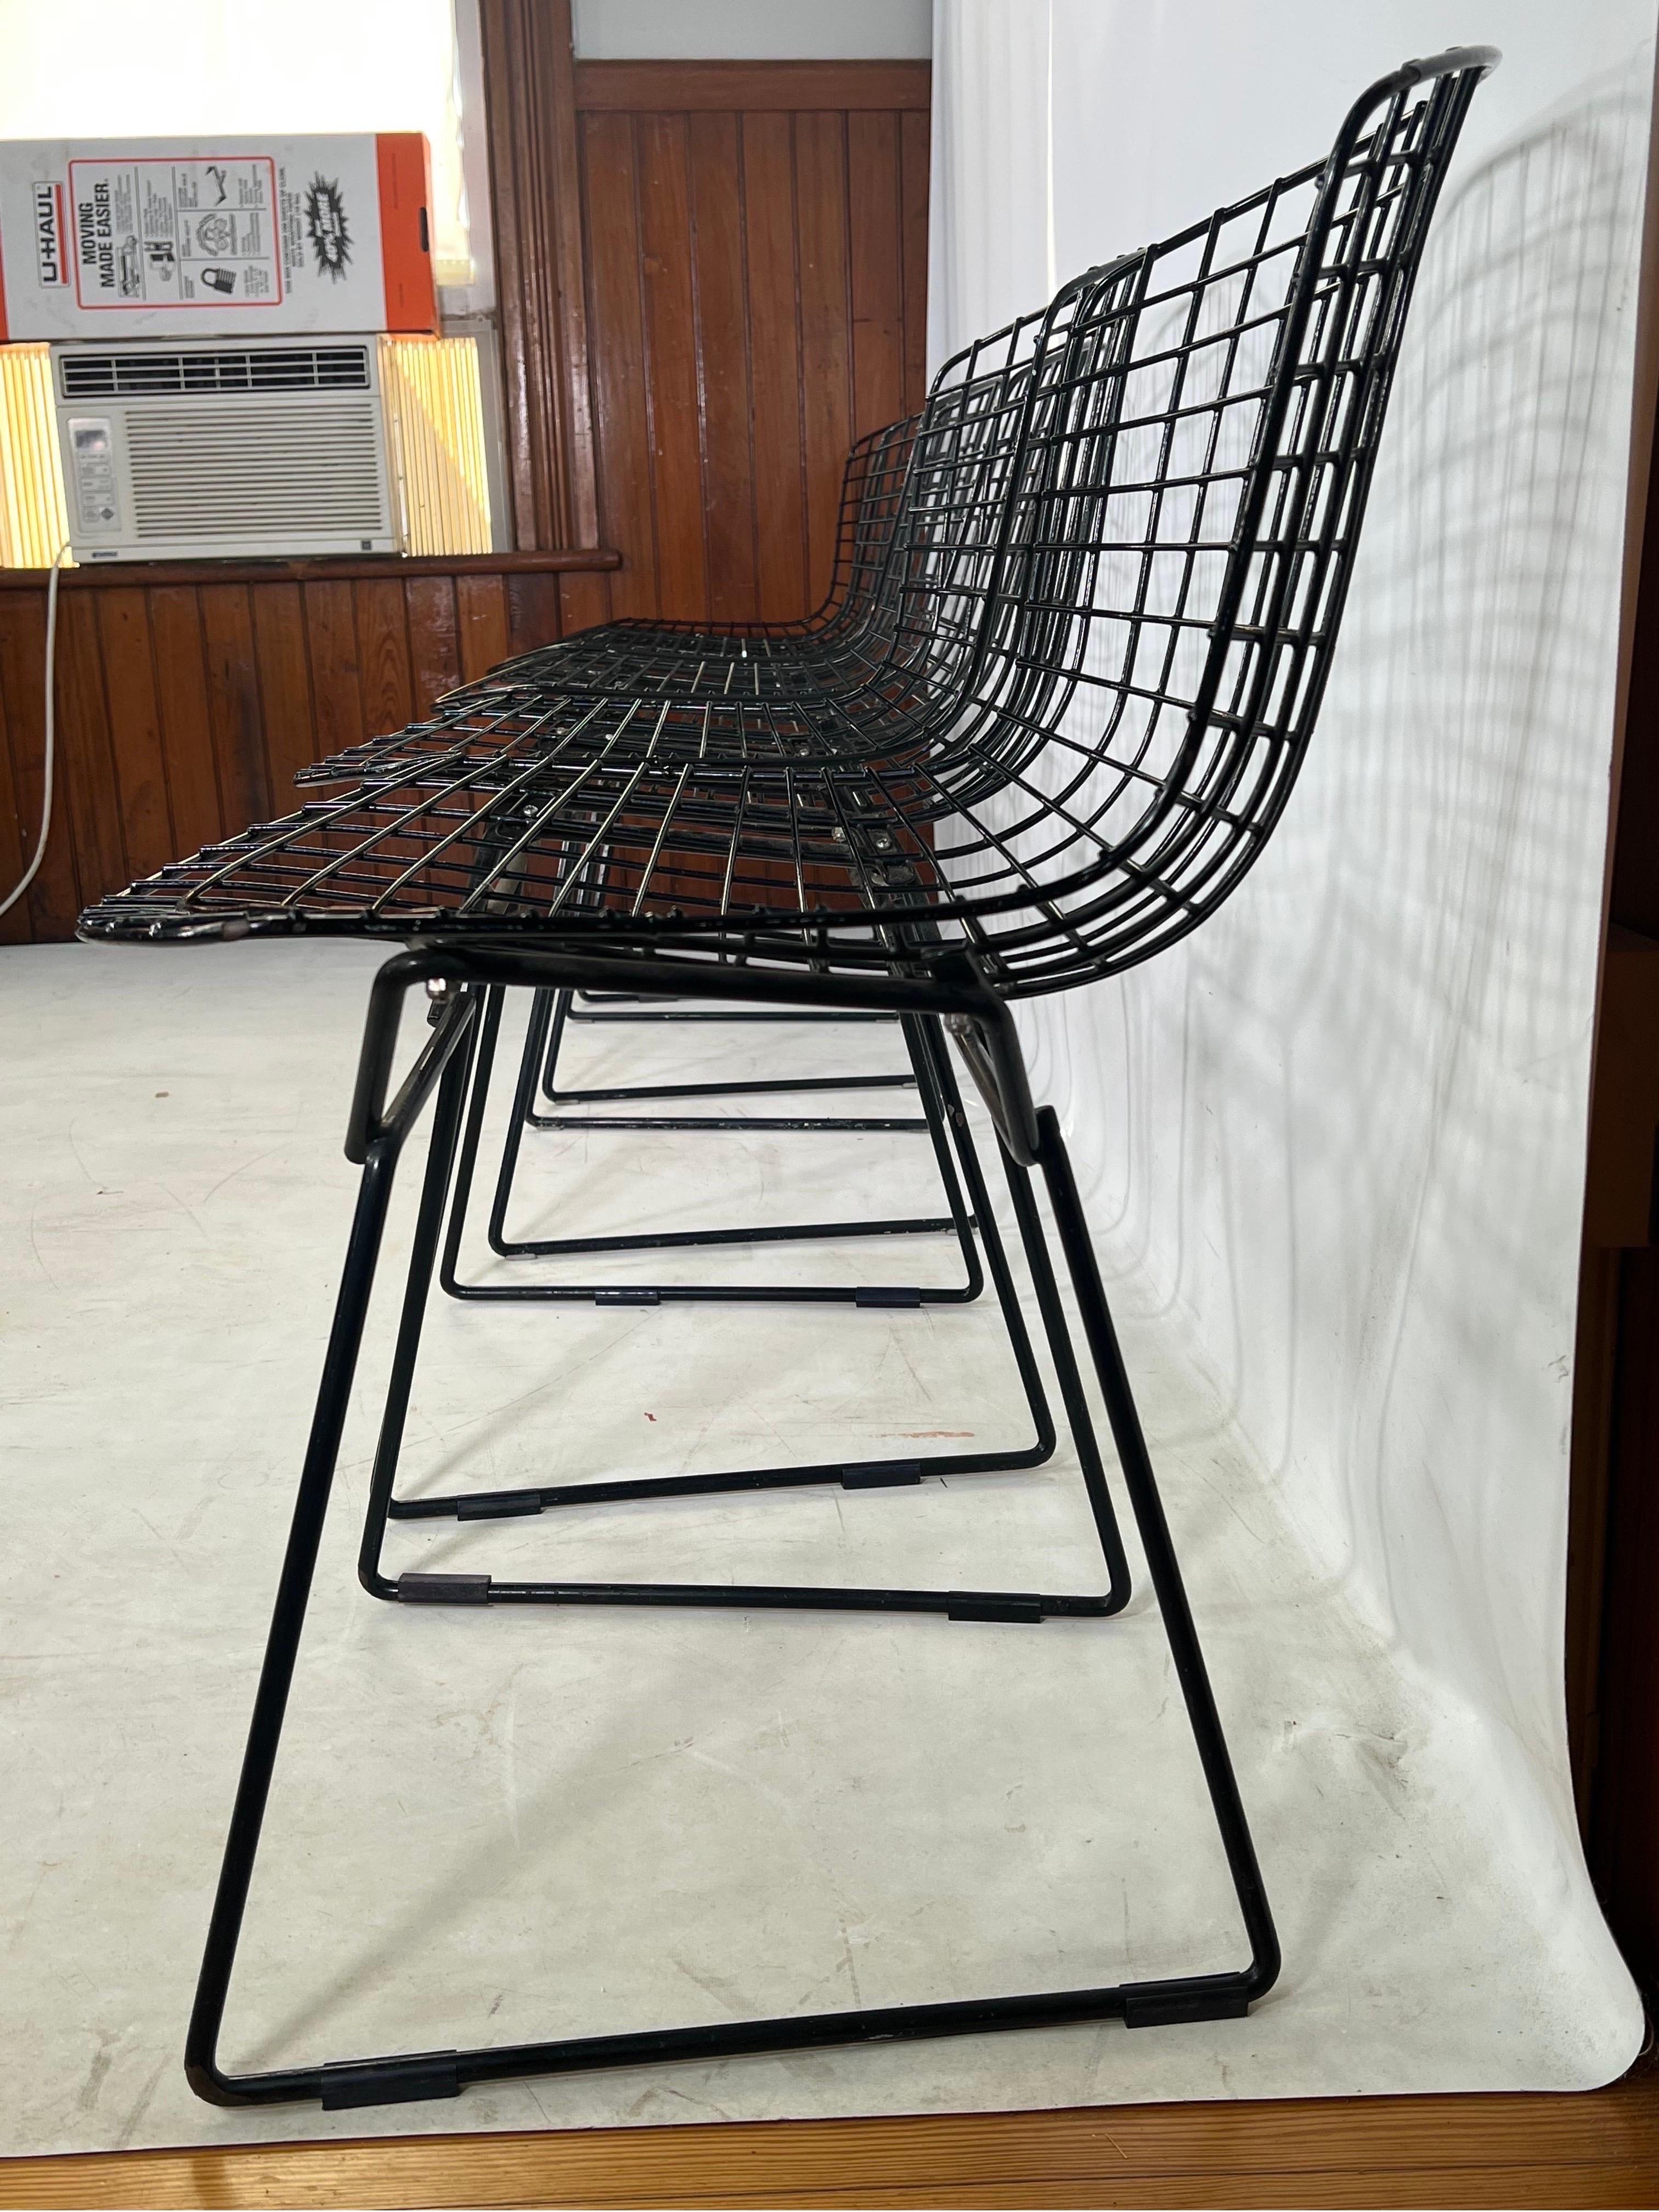 This is a very nice set of Bertoia dining chairs made by Knoll ca 1970's - 1980s The chairs are in very good original condition.